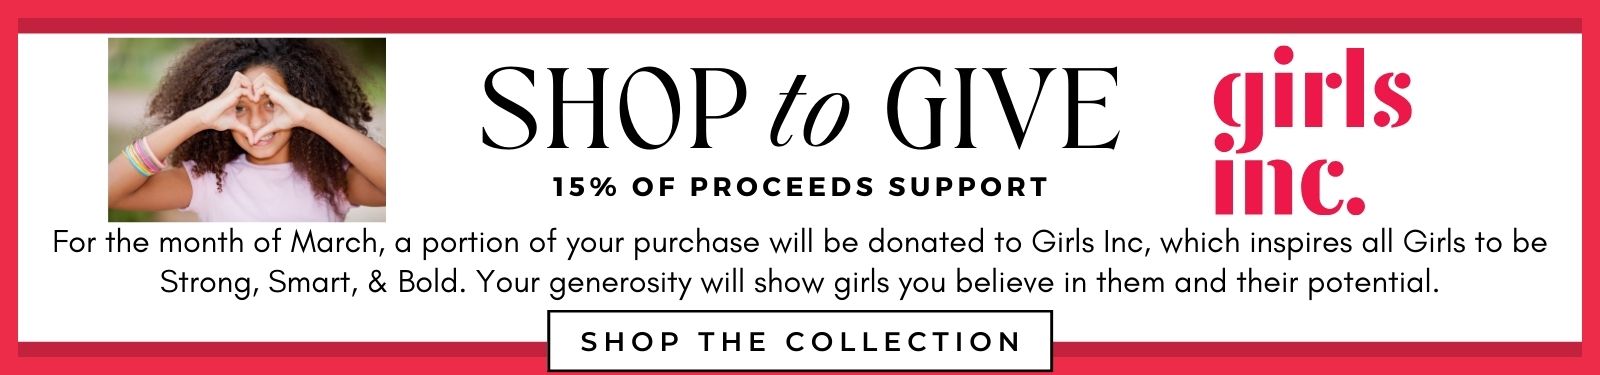 For the month of March, Charles Albert Jewelry will donate 15% of your purchase to Girls Inc, which inspires all Girls to be Strong, Smart, & Bold. Your generosity will show girls you believe in them and their potential.